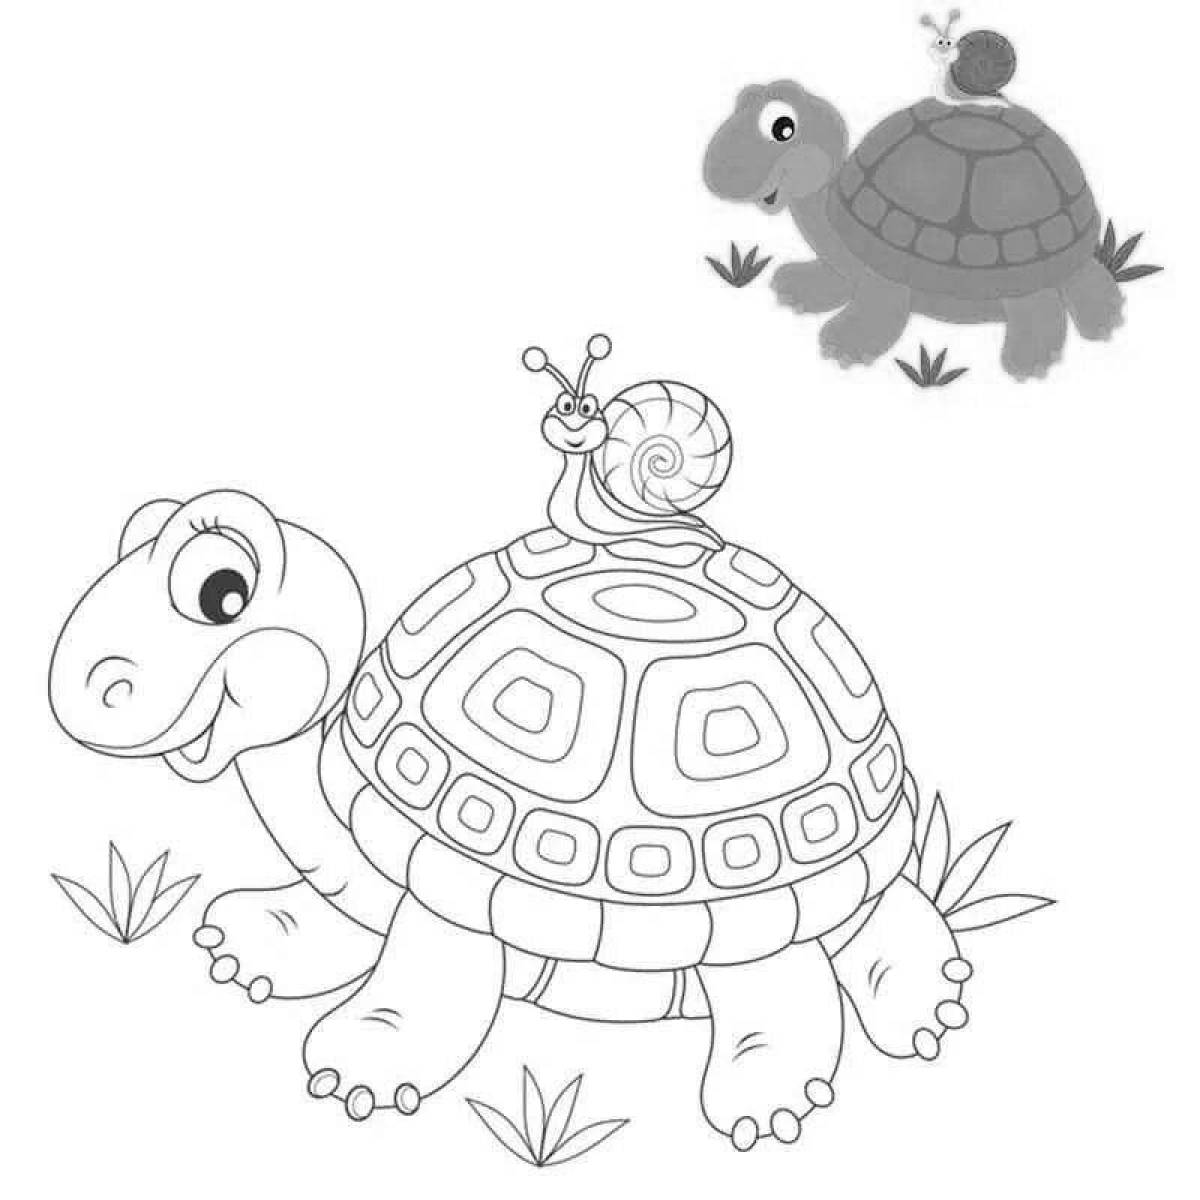 Creative turtle coloring book for 3-4 year olds